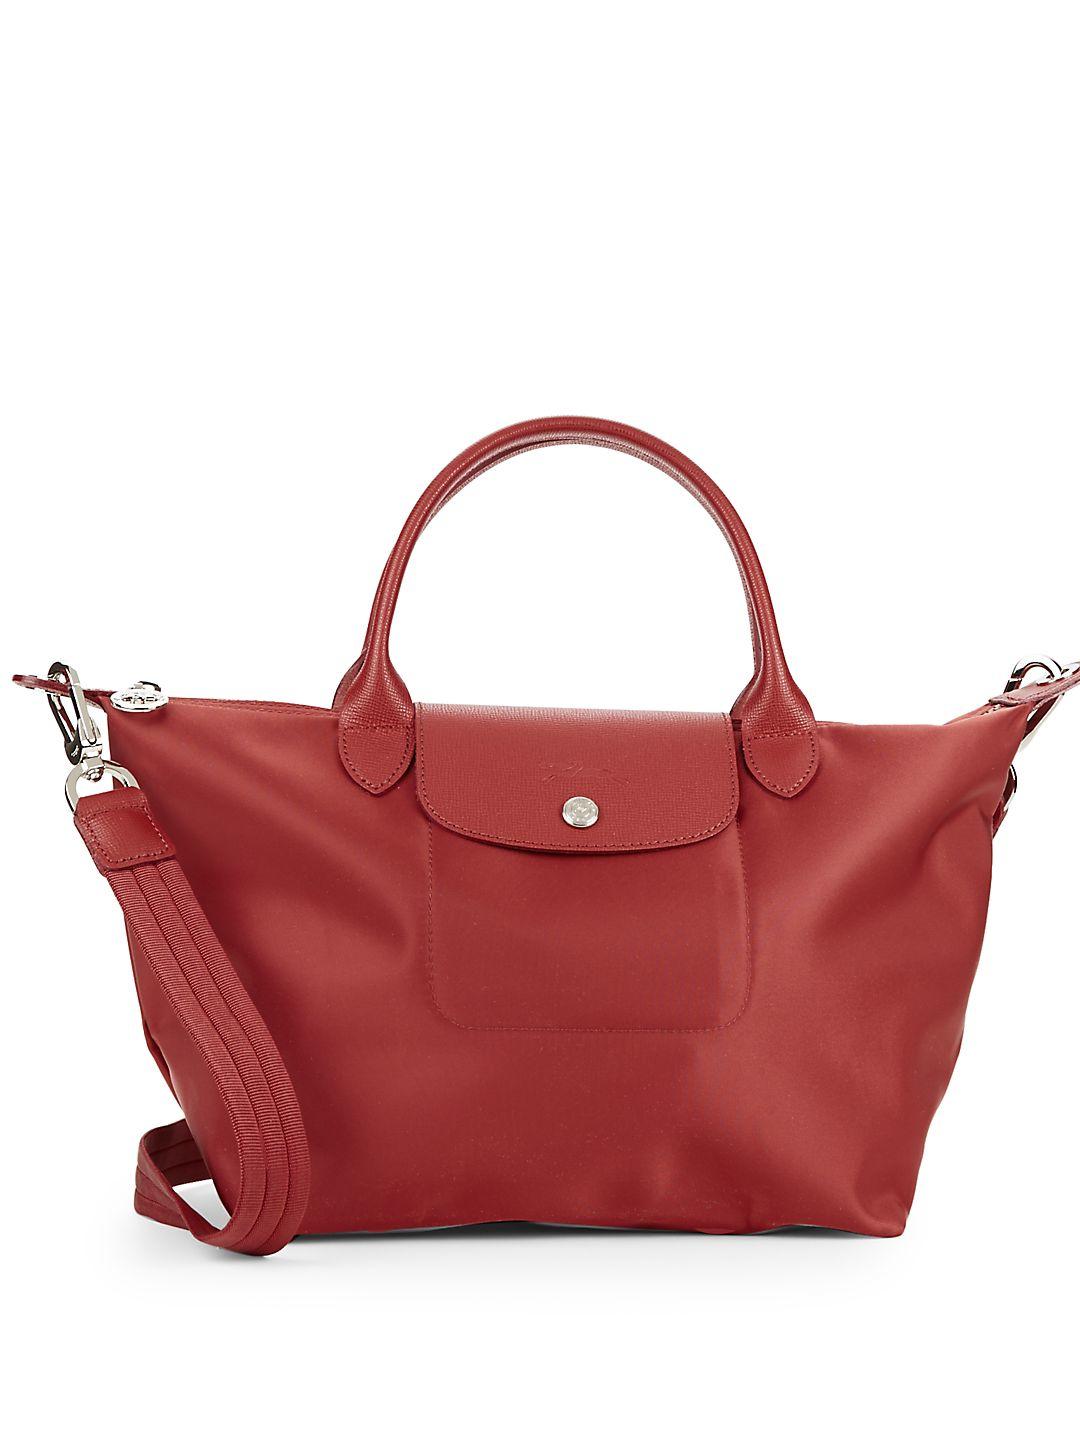 Longchamp Le Pliage Neo Small Top Handle Bag in Red | Lyst